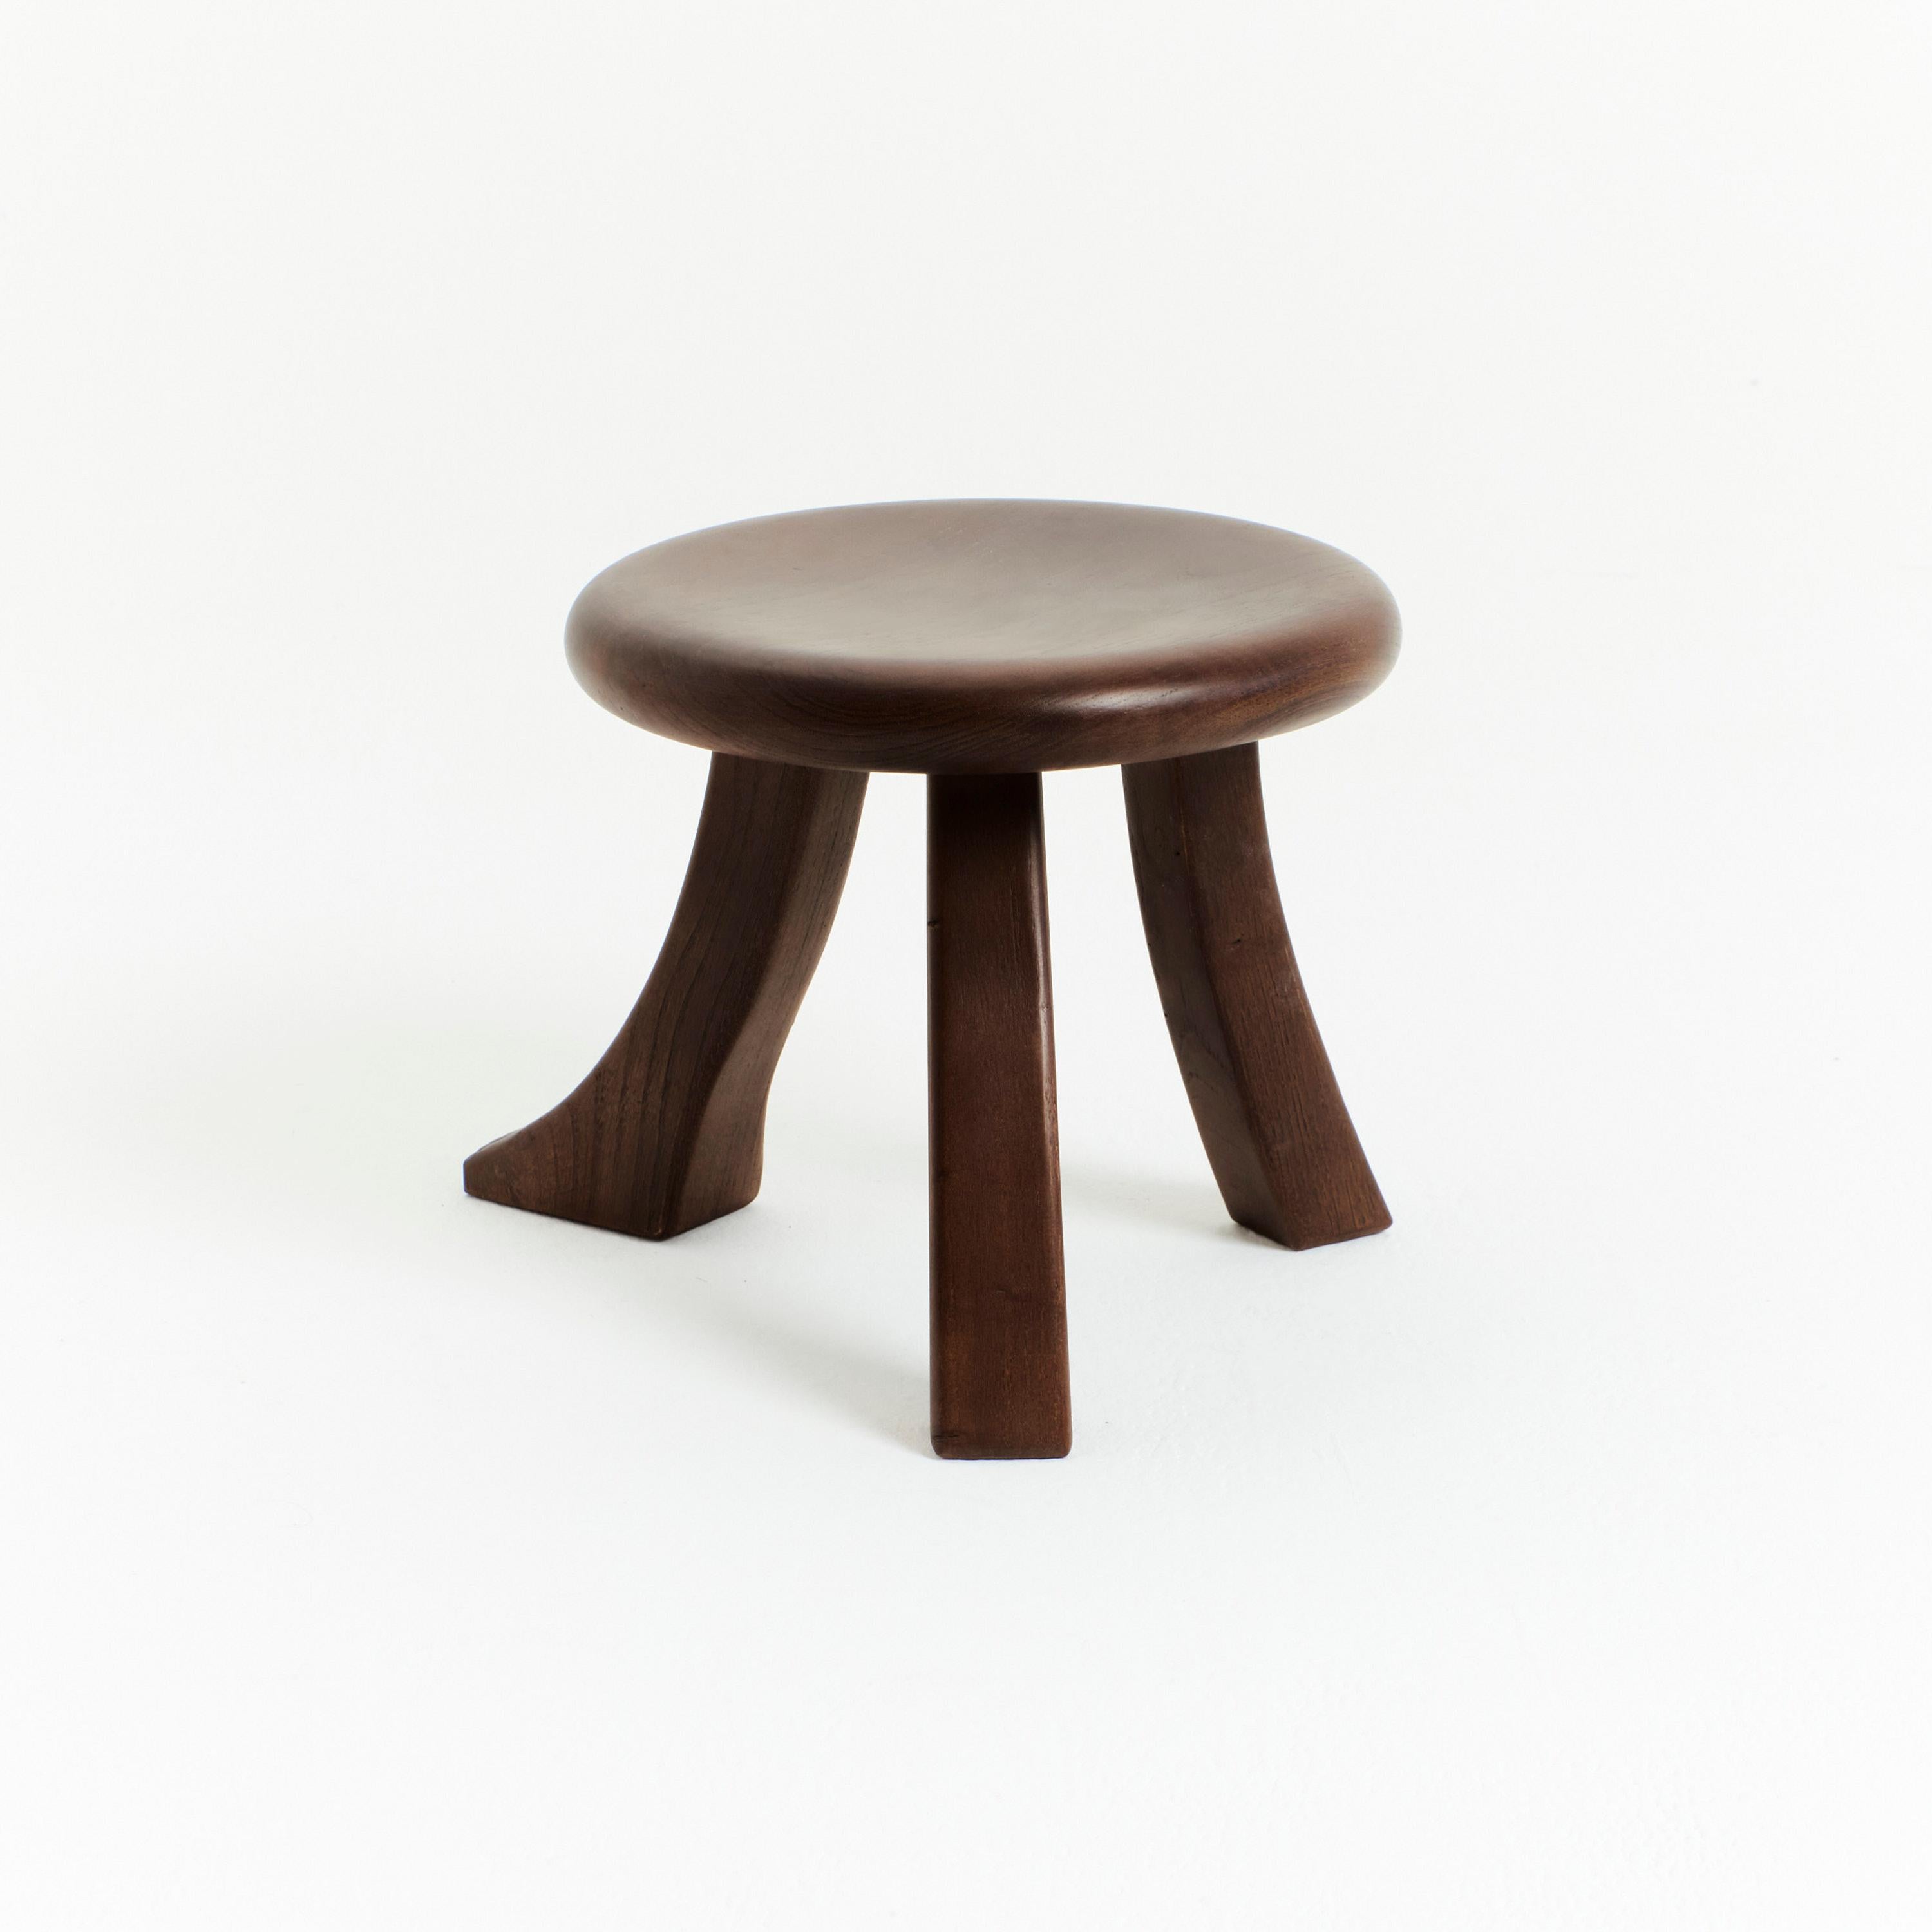 Portuguese Foot Stool Brown Chestnut For Sale